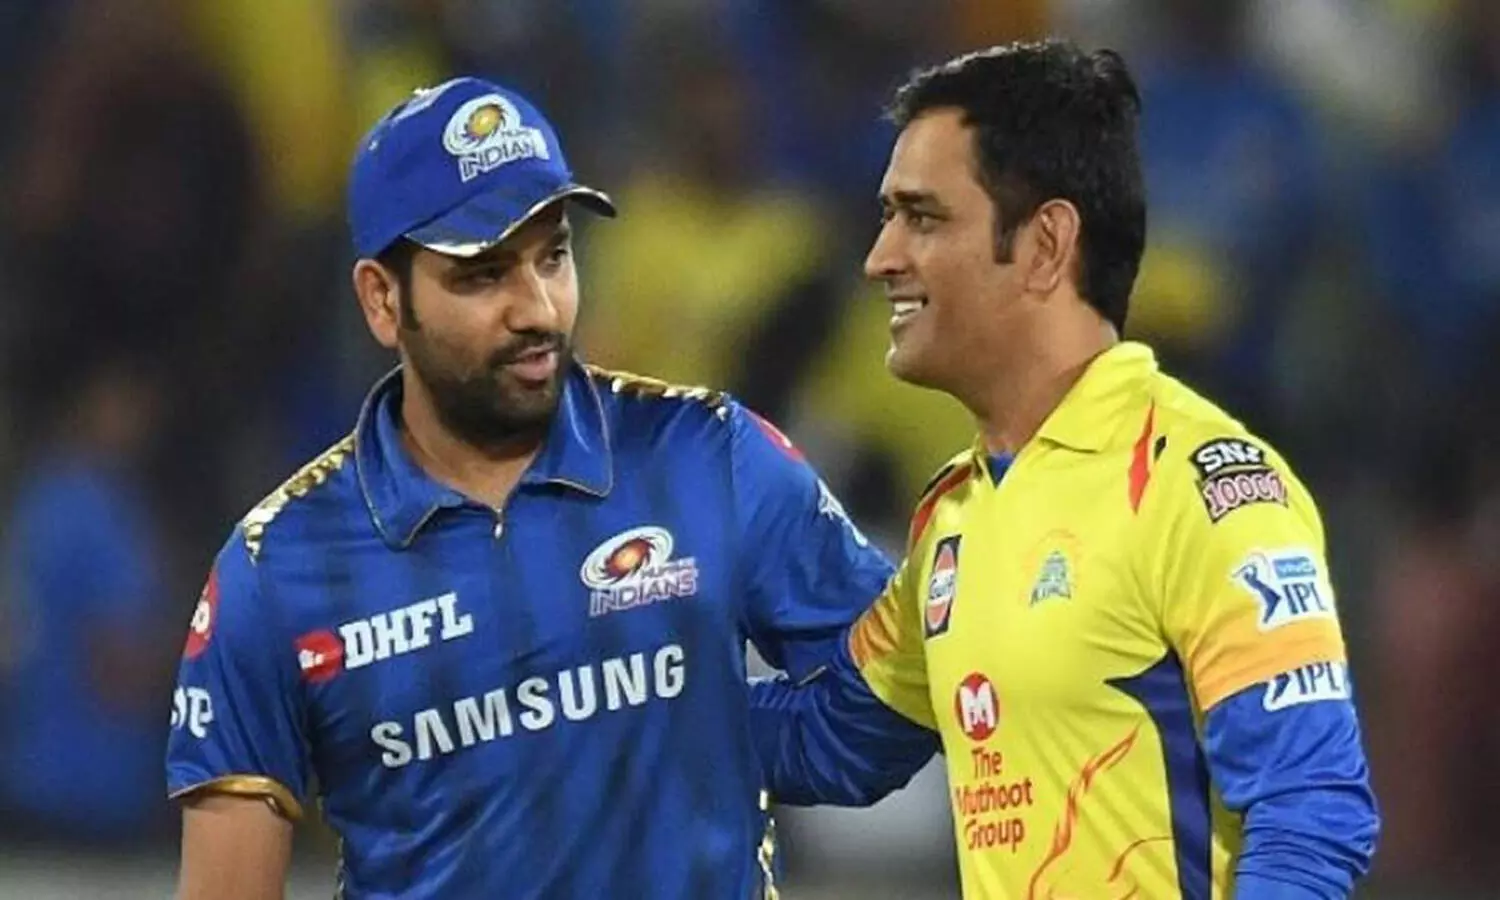 IPL 2021, CSK vs MI Playing XI: No Bravo, Dhoni as floater, Thakur can be promoted